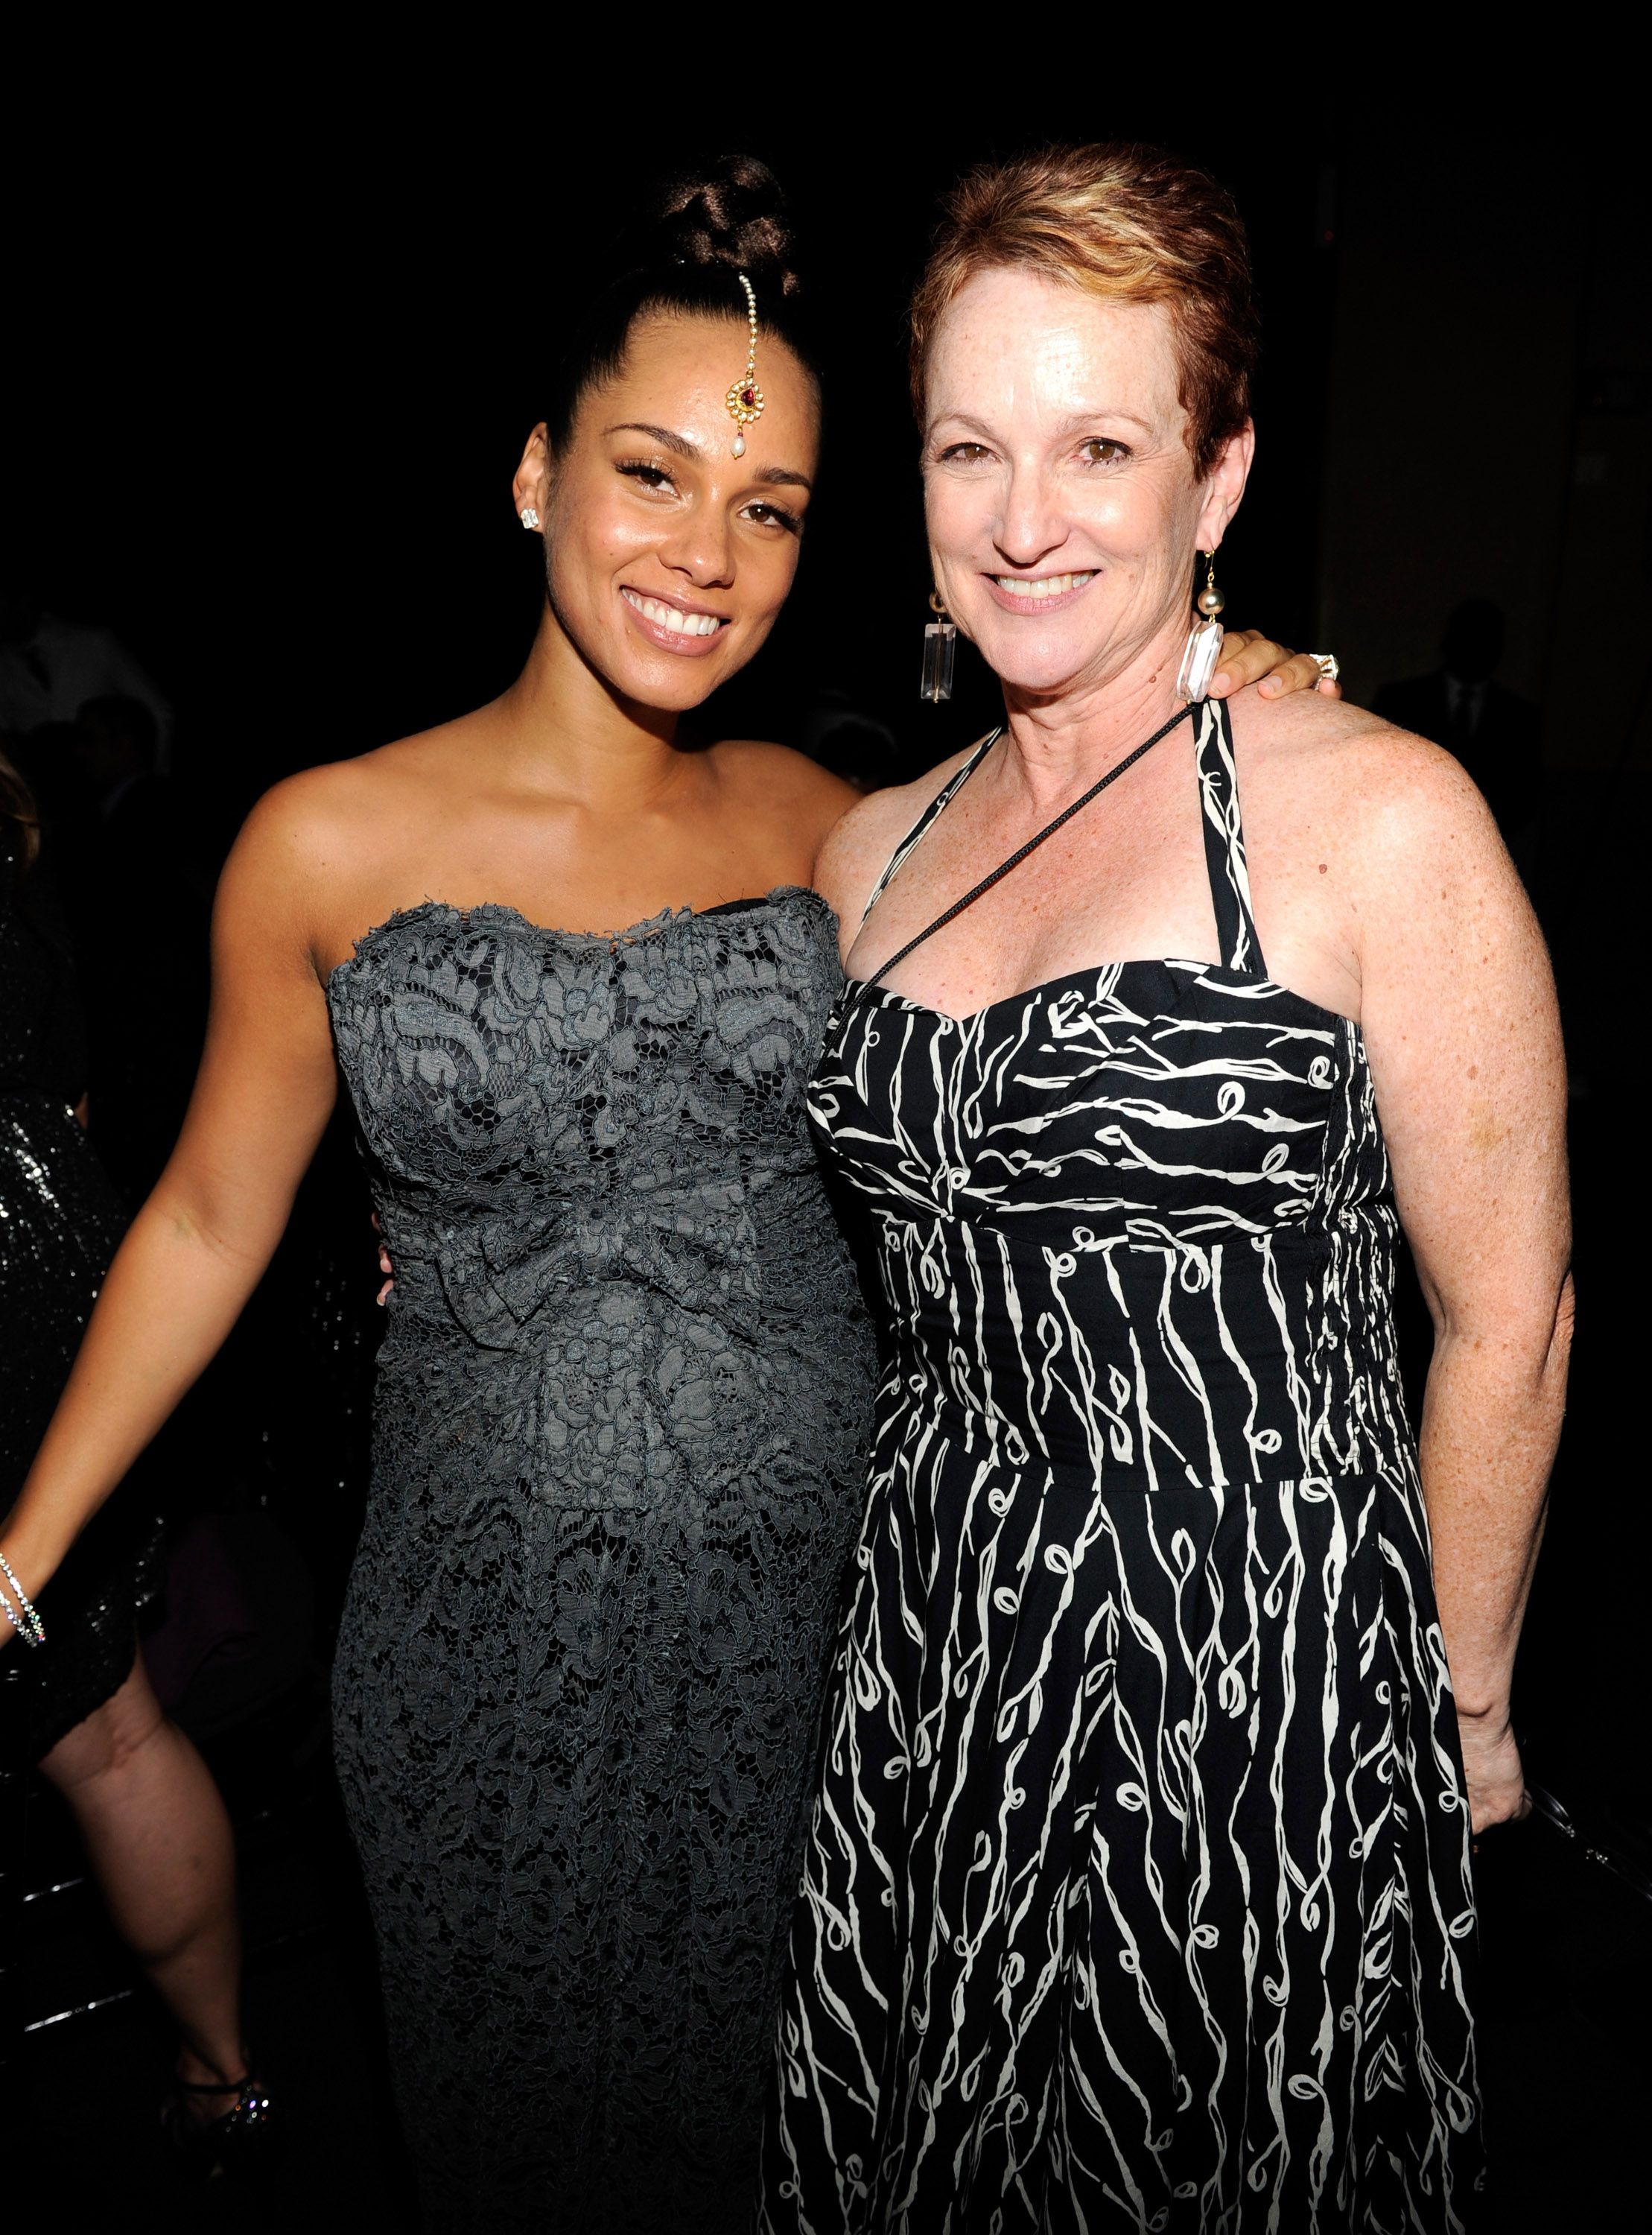 Alicia Keys and Terria Joseph at the Keep A Child Alive's 7th annual Black Ball on September 30, 2010, in New York City. | Source: WireImage/zgetty Images